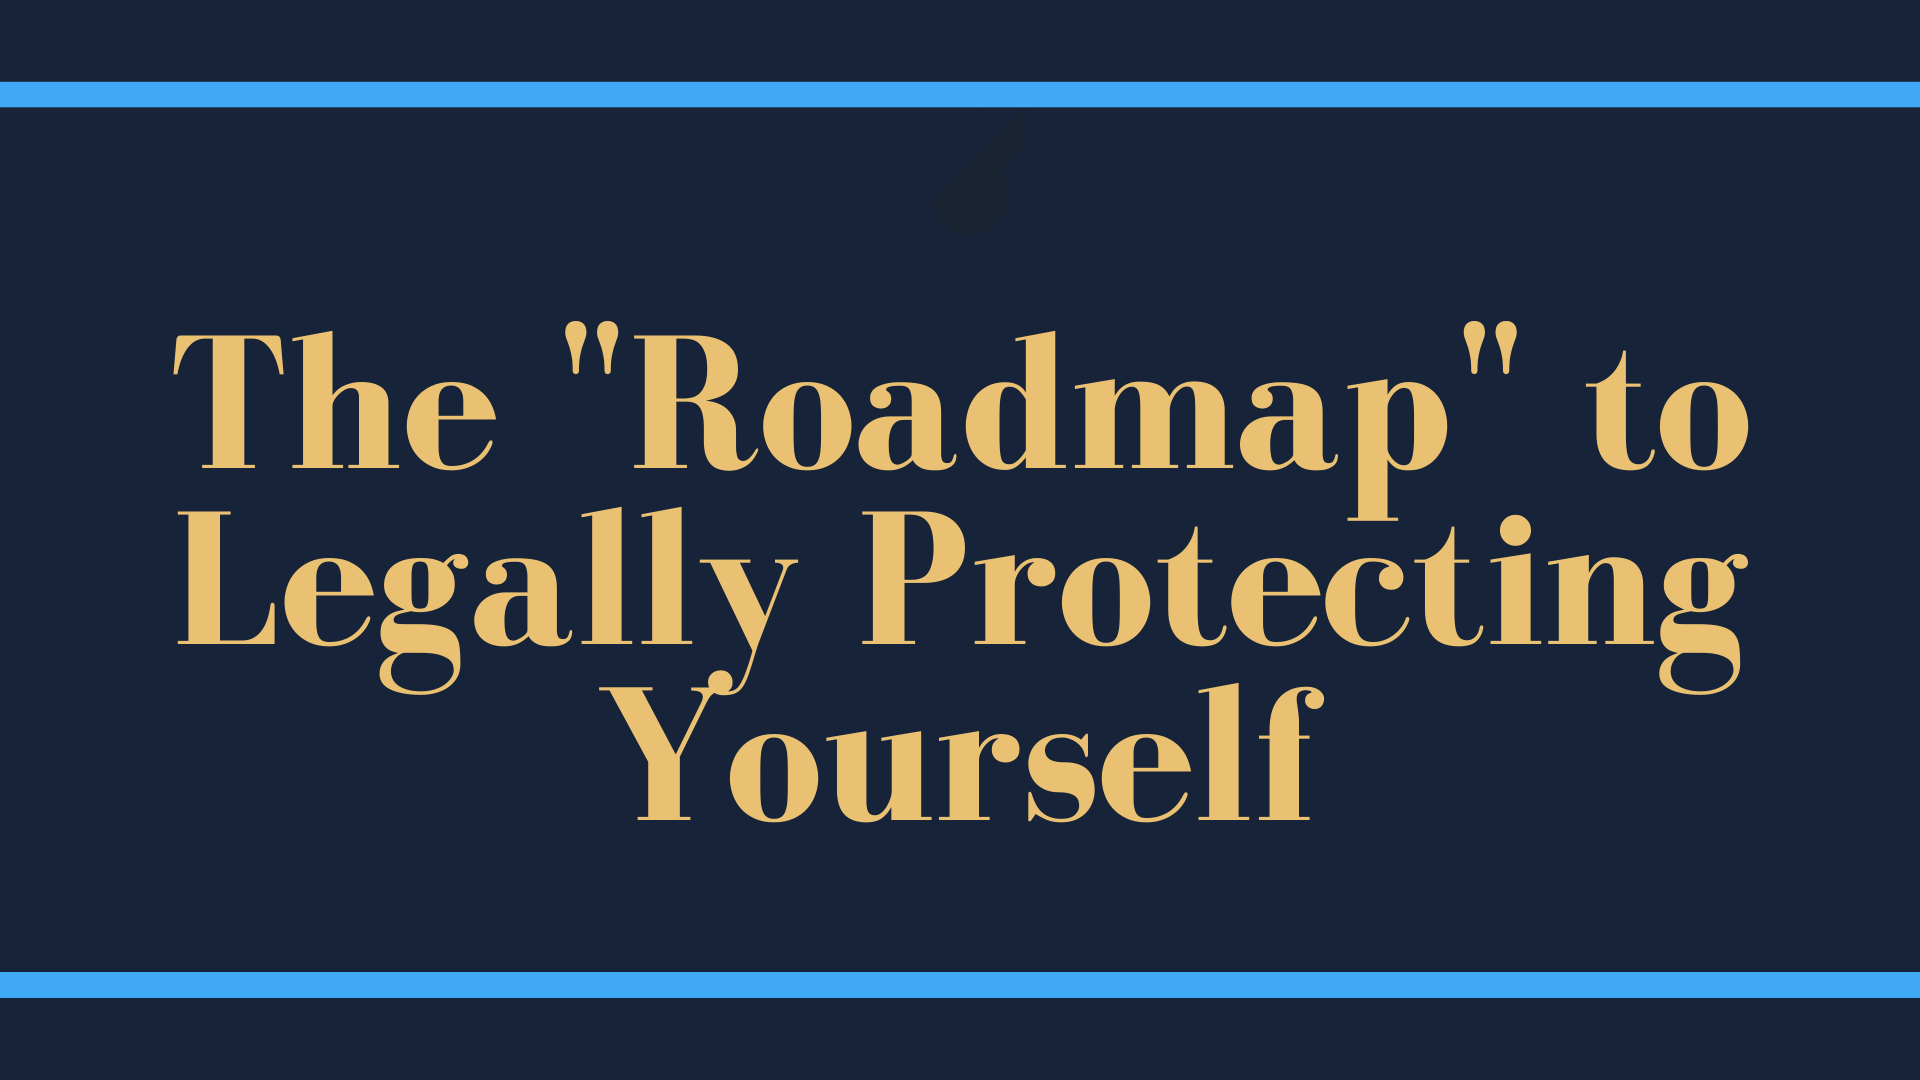 The Roadmap to Legally Protecting Yourself